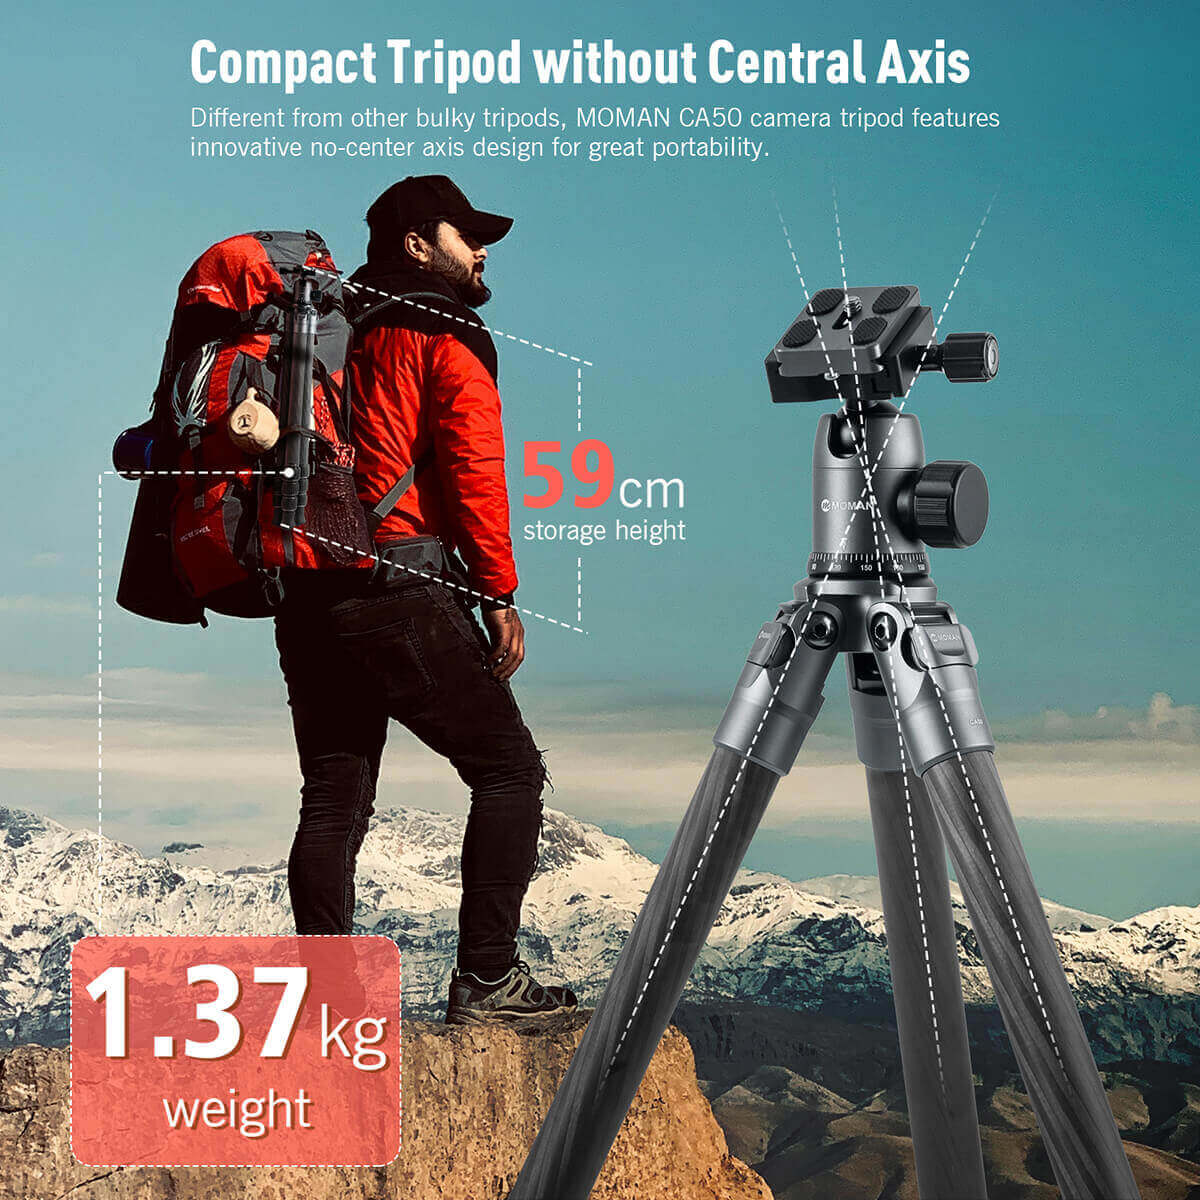 Moman CA50 travel tripods is compact without the central axis. Its storage height is only 59cm and weighs 1.37kg.